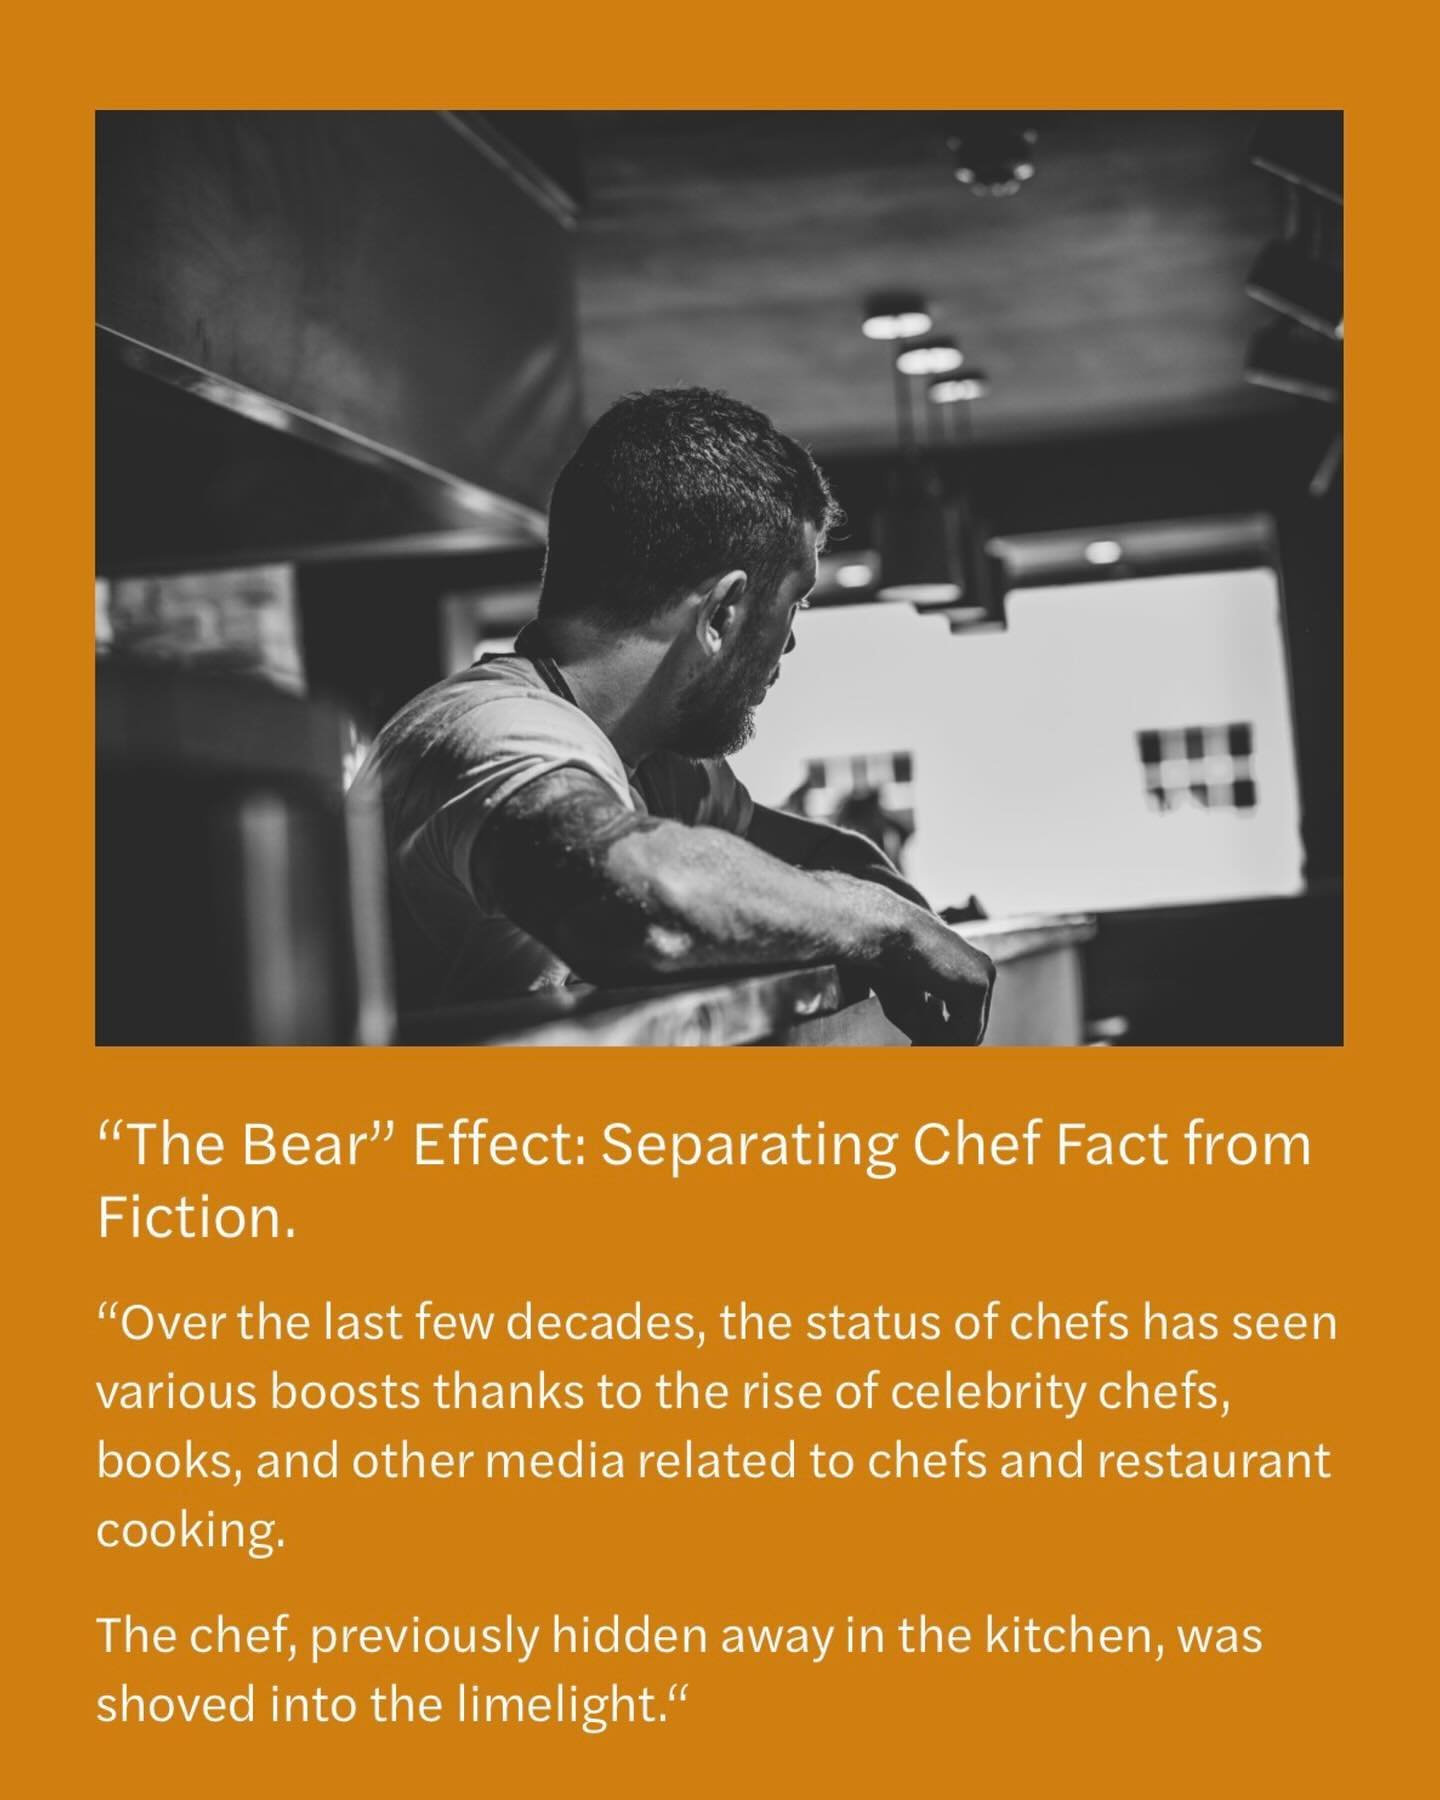 &quot;The Bear&quot; Effect: Separating Chef Fact from Fiction.

In my most recent article, I talk about cheffing as a trend and how popular media like The Bear can propel the status of chefs to new heights.

You can find this and previous articles o